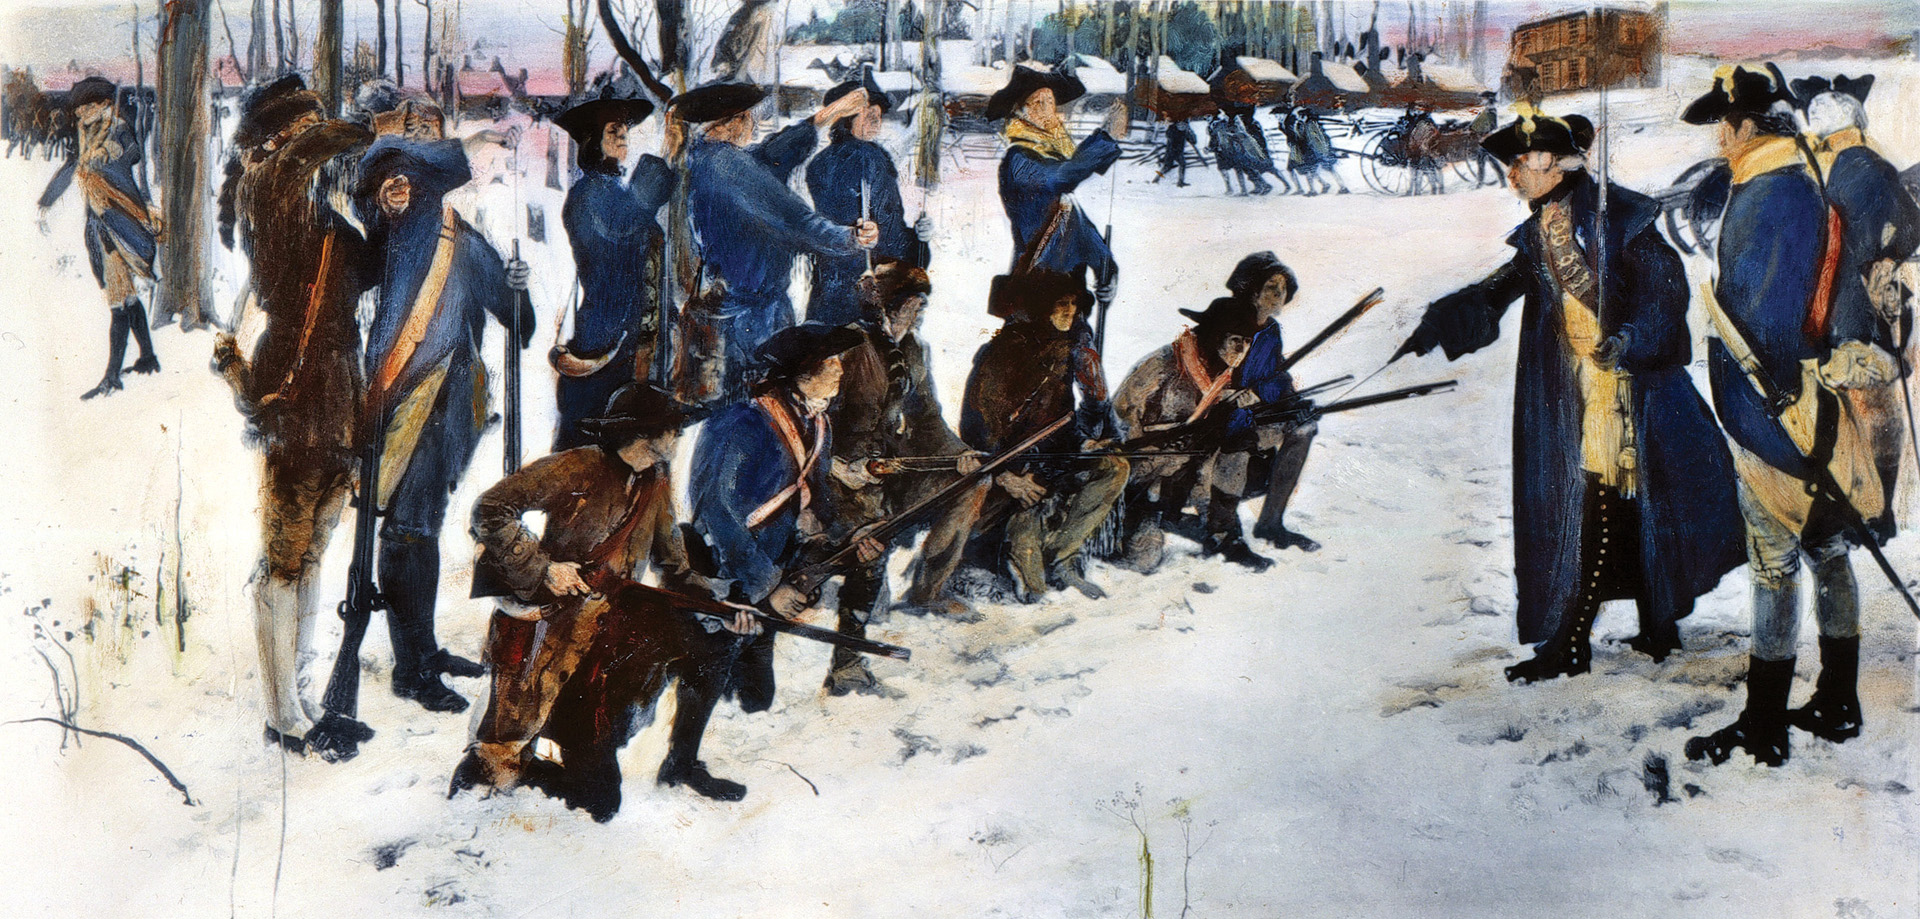 Maj. Gen. von Steuben began drilling and training Continental troops soon after his arrival on February 23, 1778. His ultimate objective was to ensure that the Continental soldiers were thoroughly competent in European methods of war. 